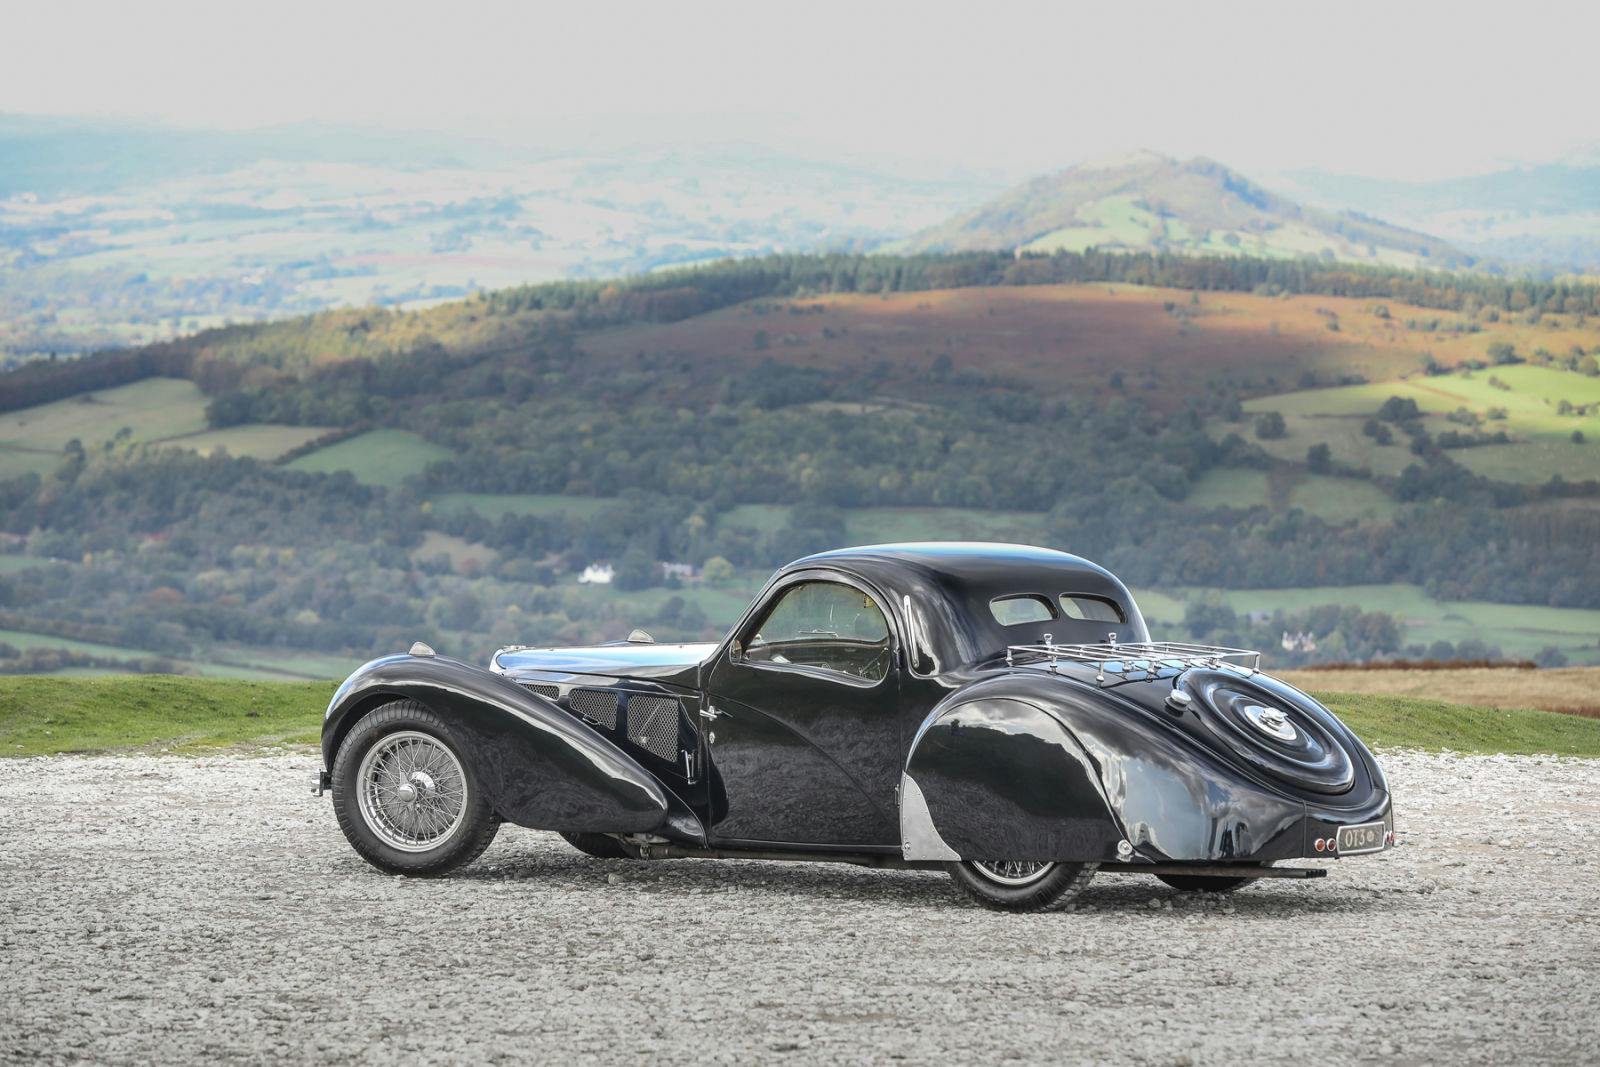 The 1937 Bugatti Type 57S Atalante was auctioned for $ 10.44 million.